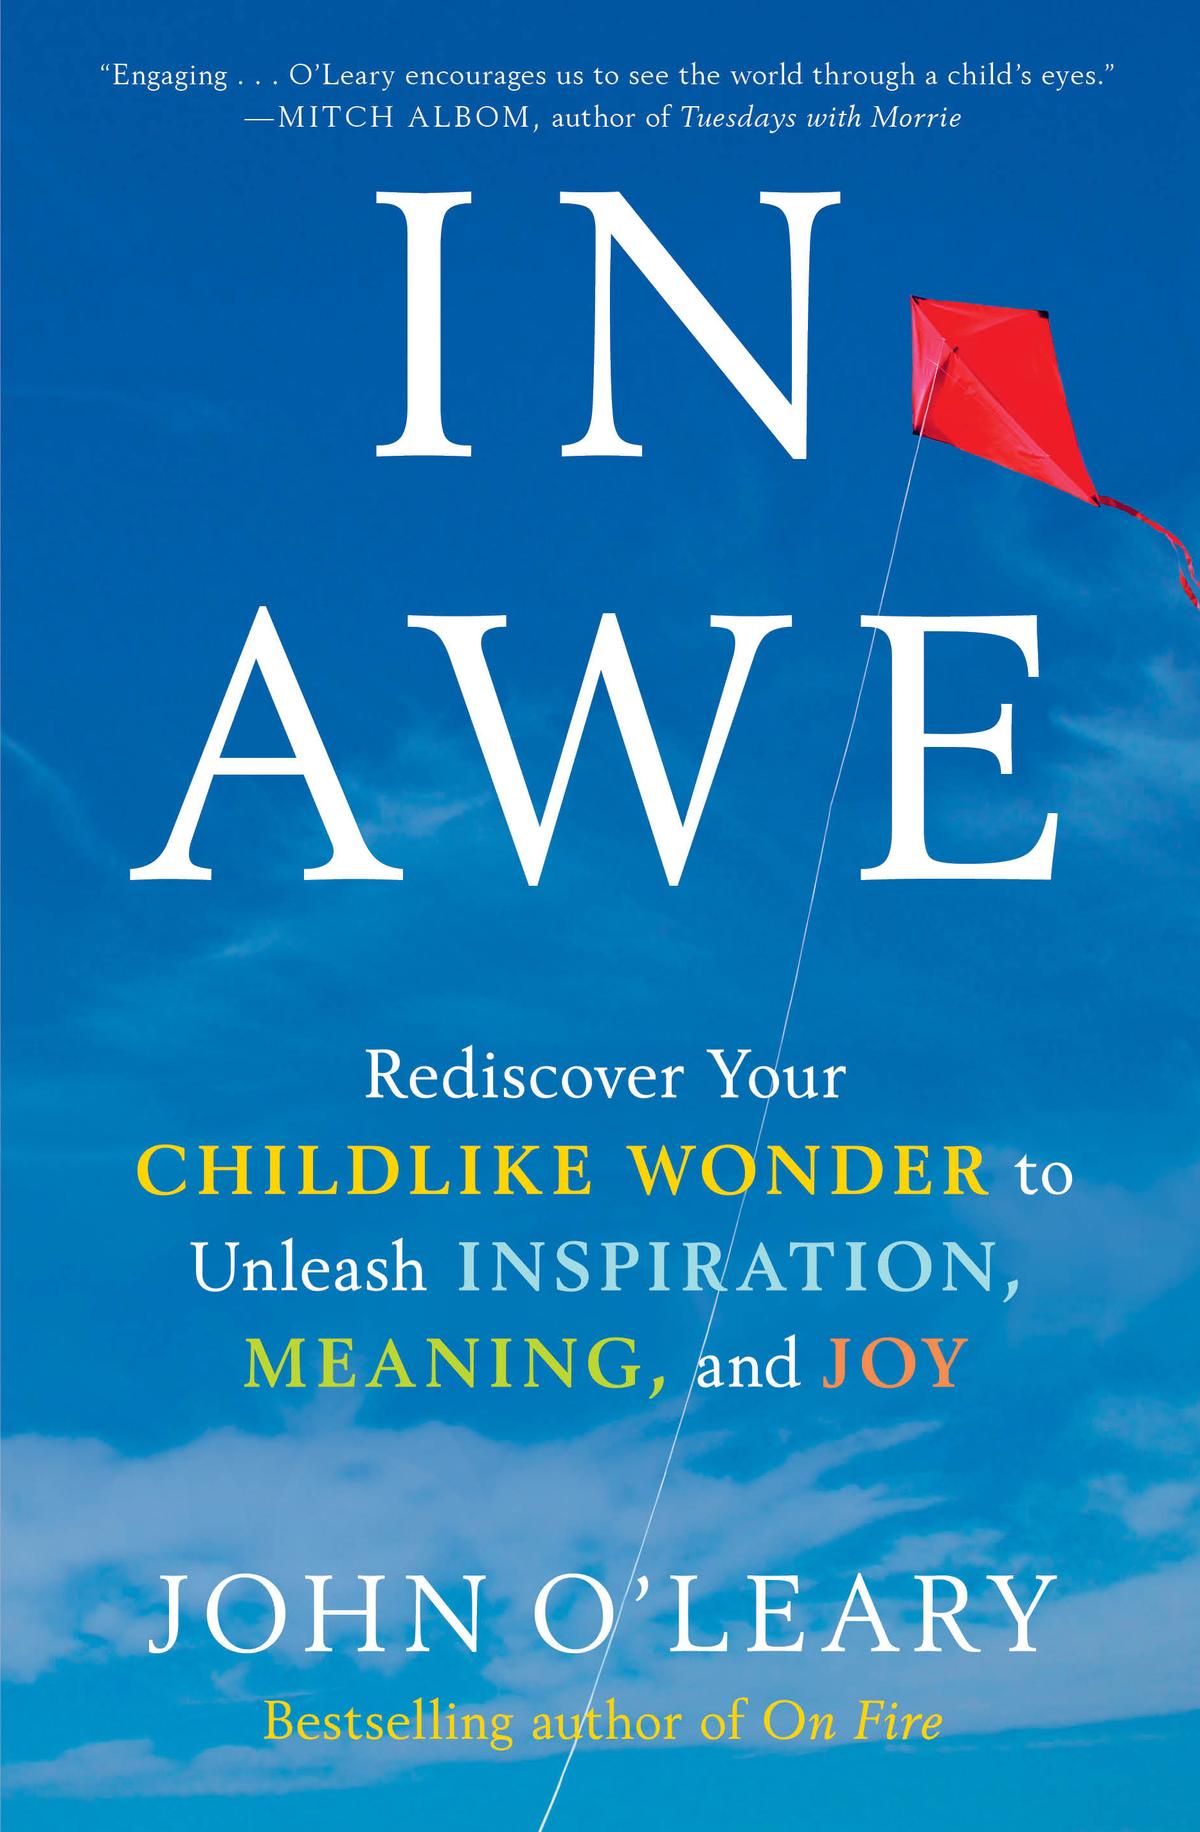 O'Leary's latest book, "In Awe," comes with a 21-day reading challenge, at ReadInAwe.com.